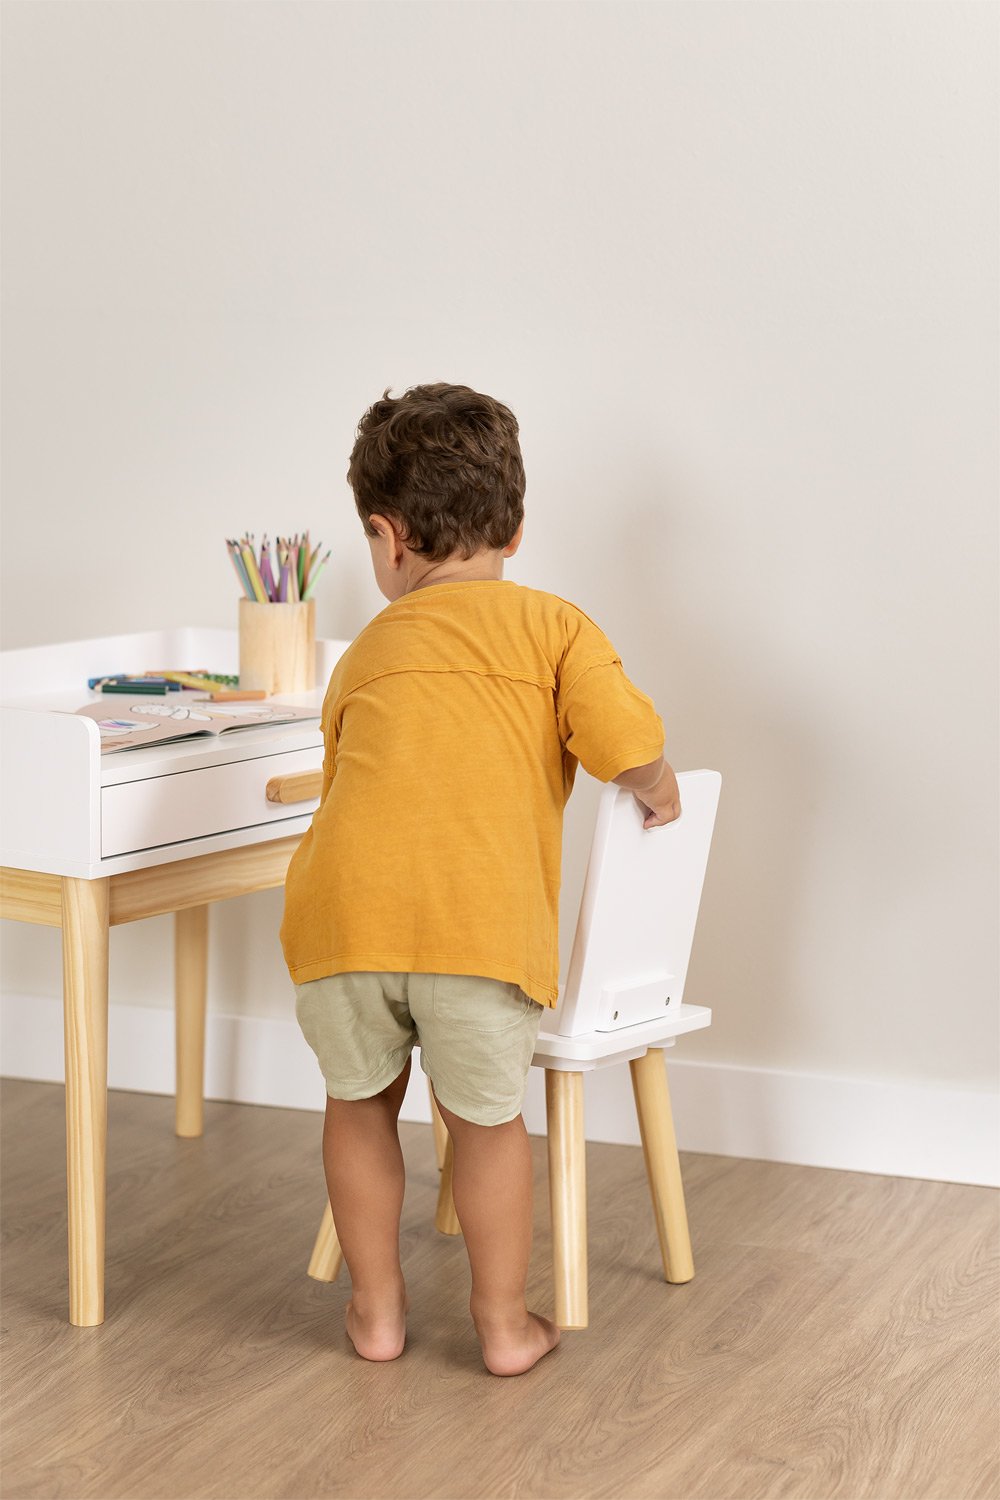 Tom Kids wooden chair, gallery image 1